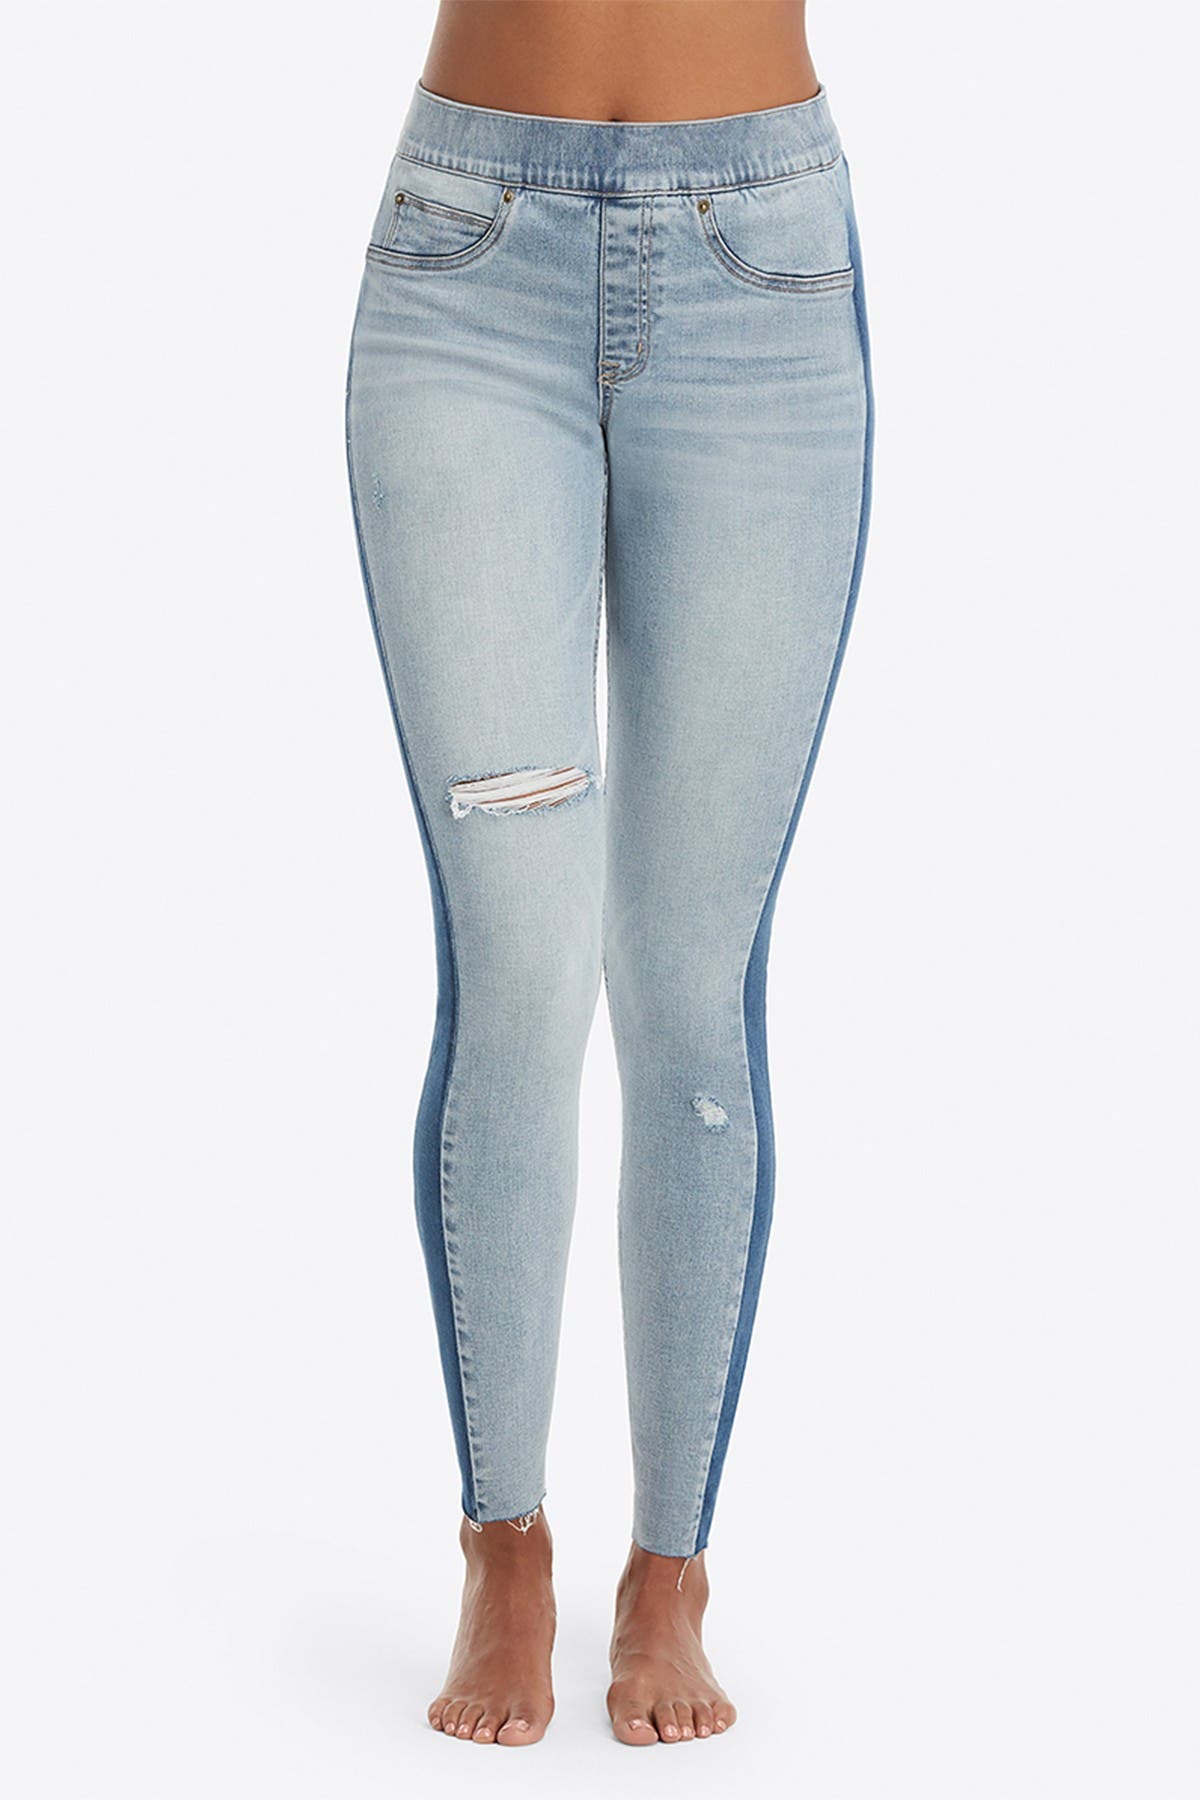 spanx distressed jeans reviews